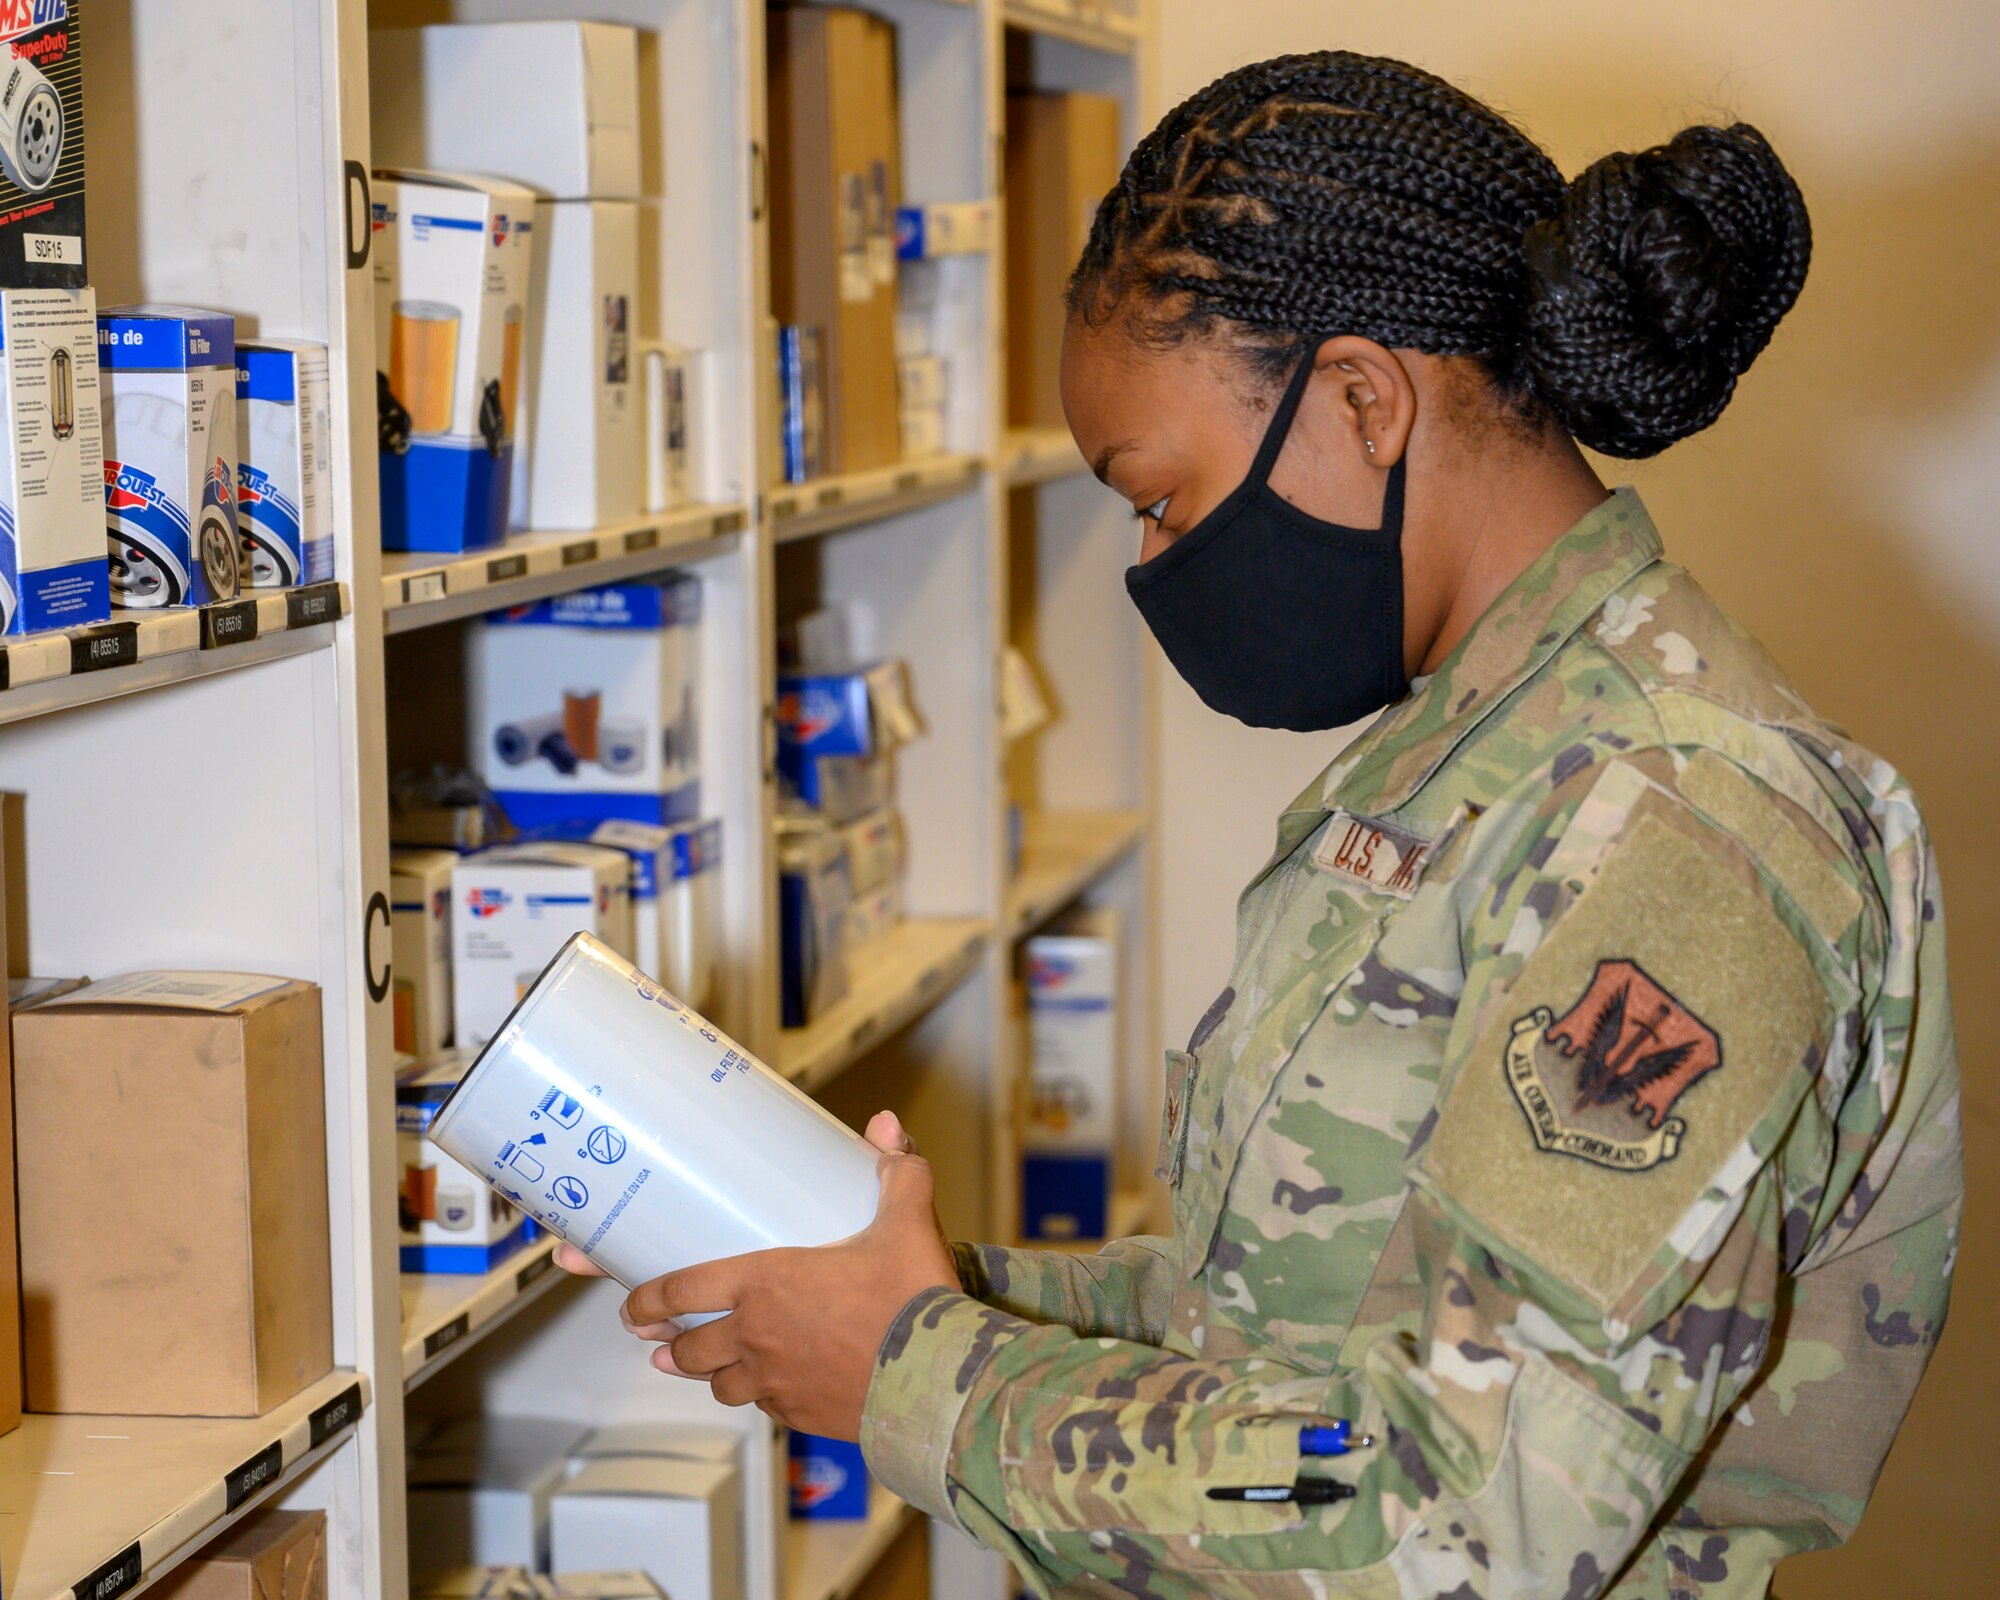 An Airman inspects vehicle management’s parts inventory.